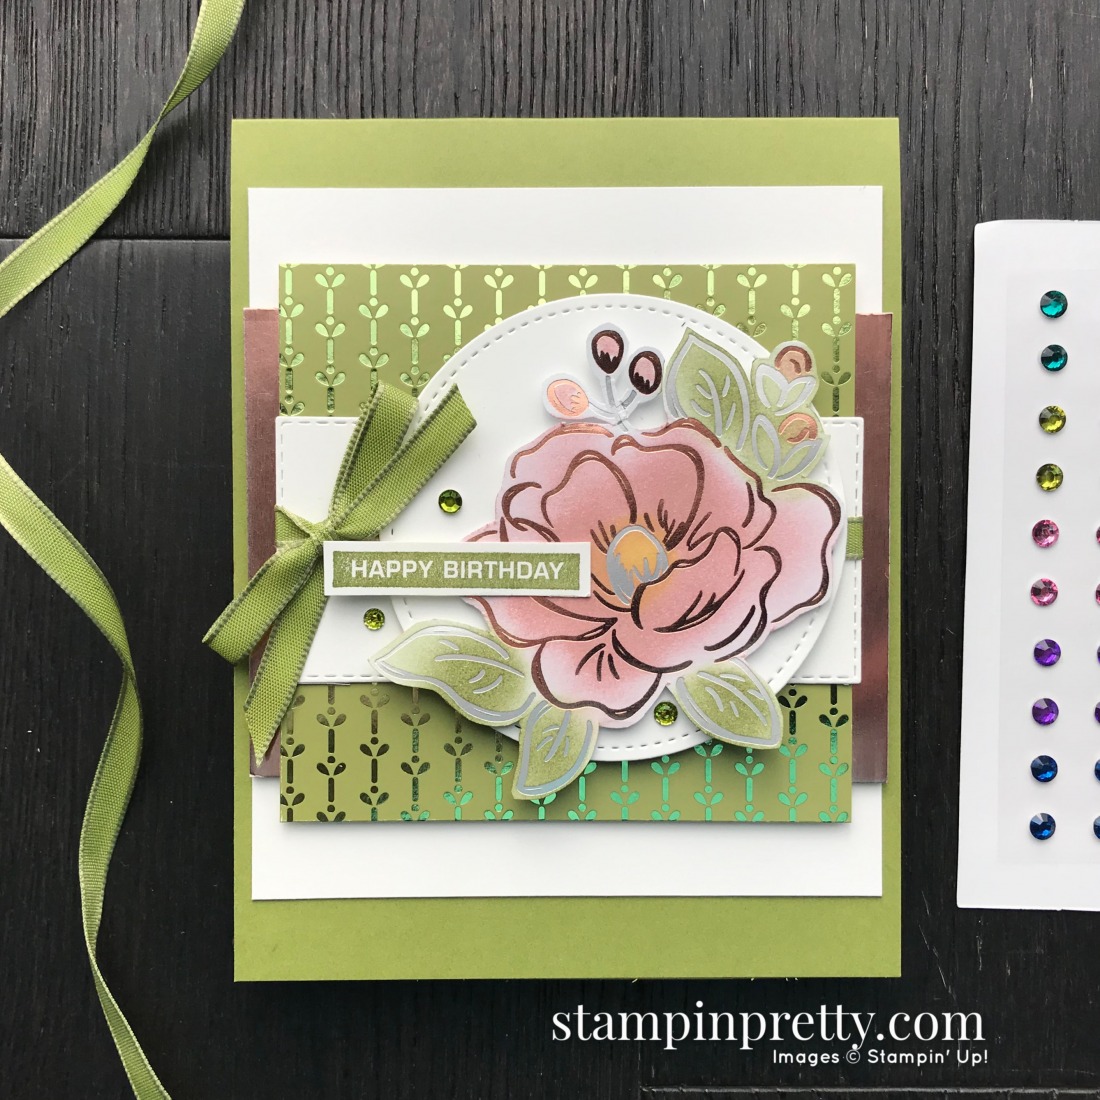 Flowering Foils Designer Series Paper by Stampin' Up! Earn FREE. Mary Fish, Stampin' Pretty